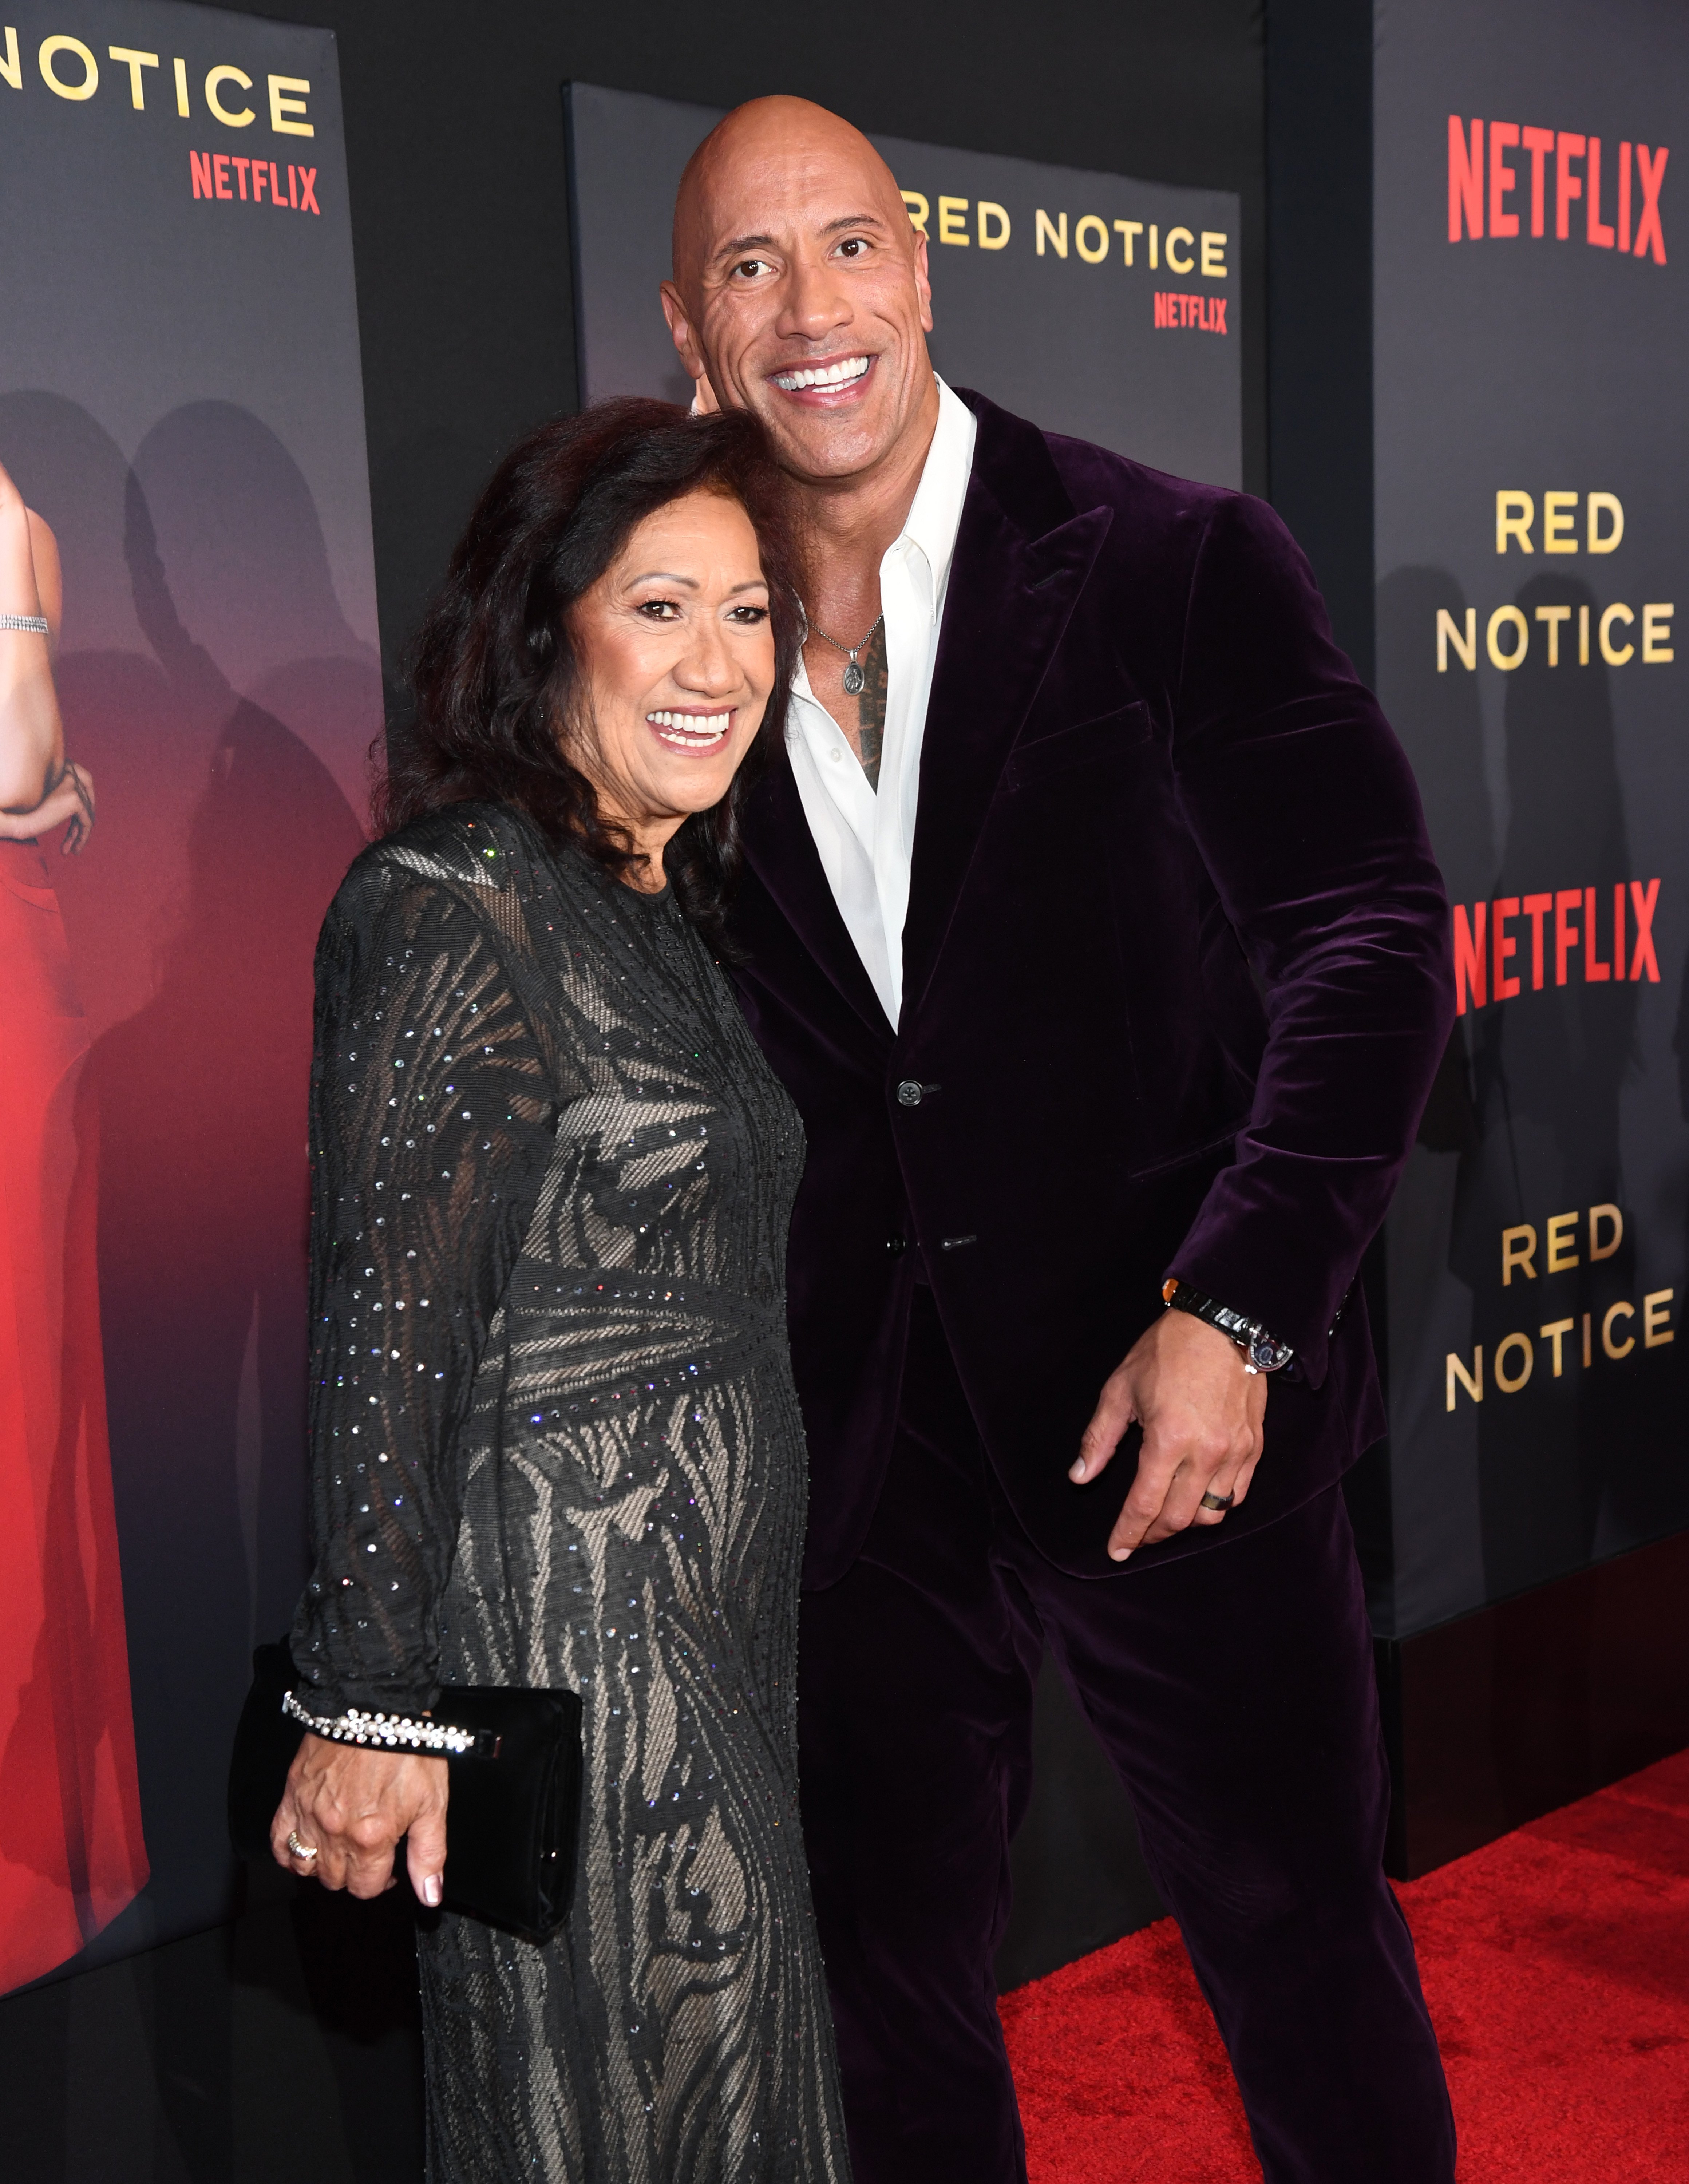 Ata Johnson and Dwayne Johnson attend the World Premiere of Netflix's "Red Notice" at Regal LA Live on November 03, 2021 in Los Angeles, California | Source: Getty Images